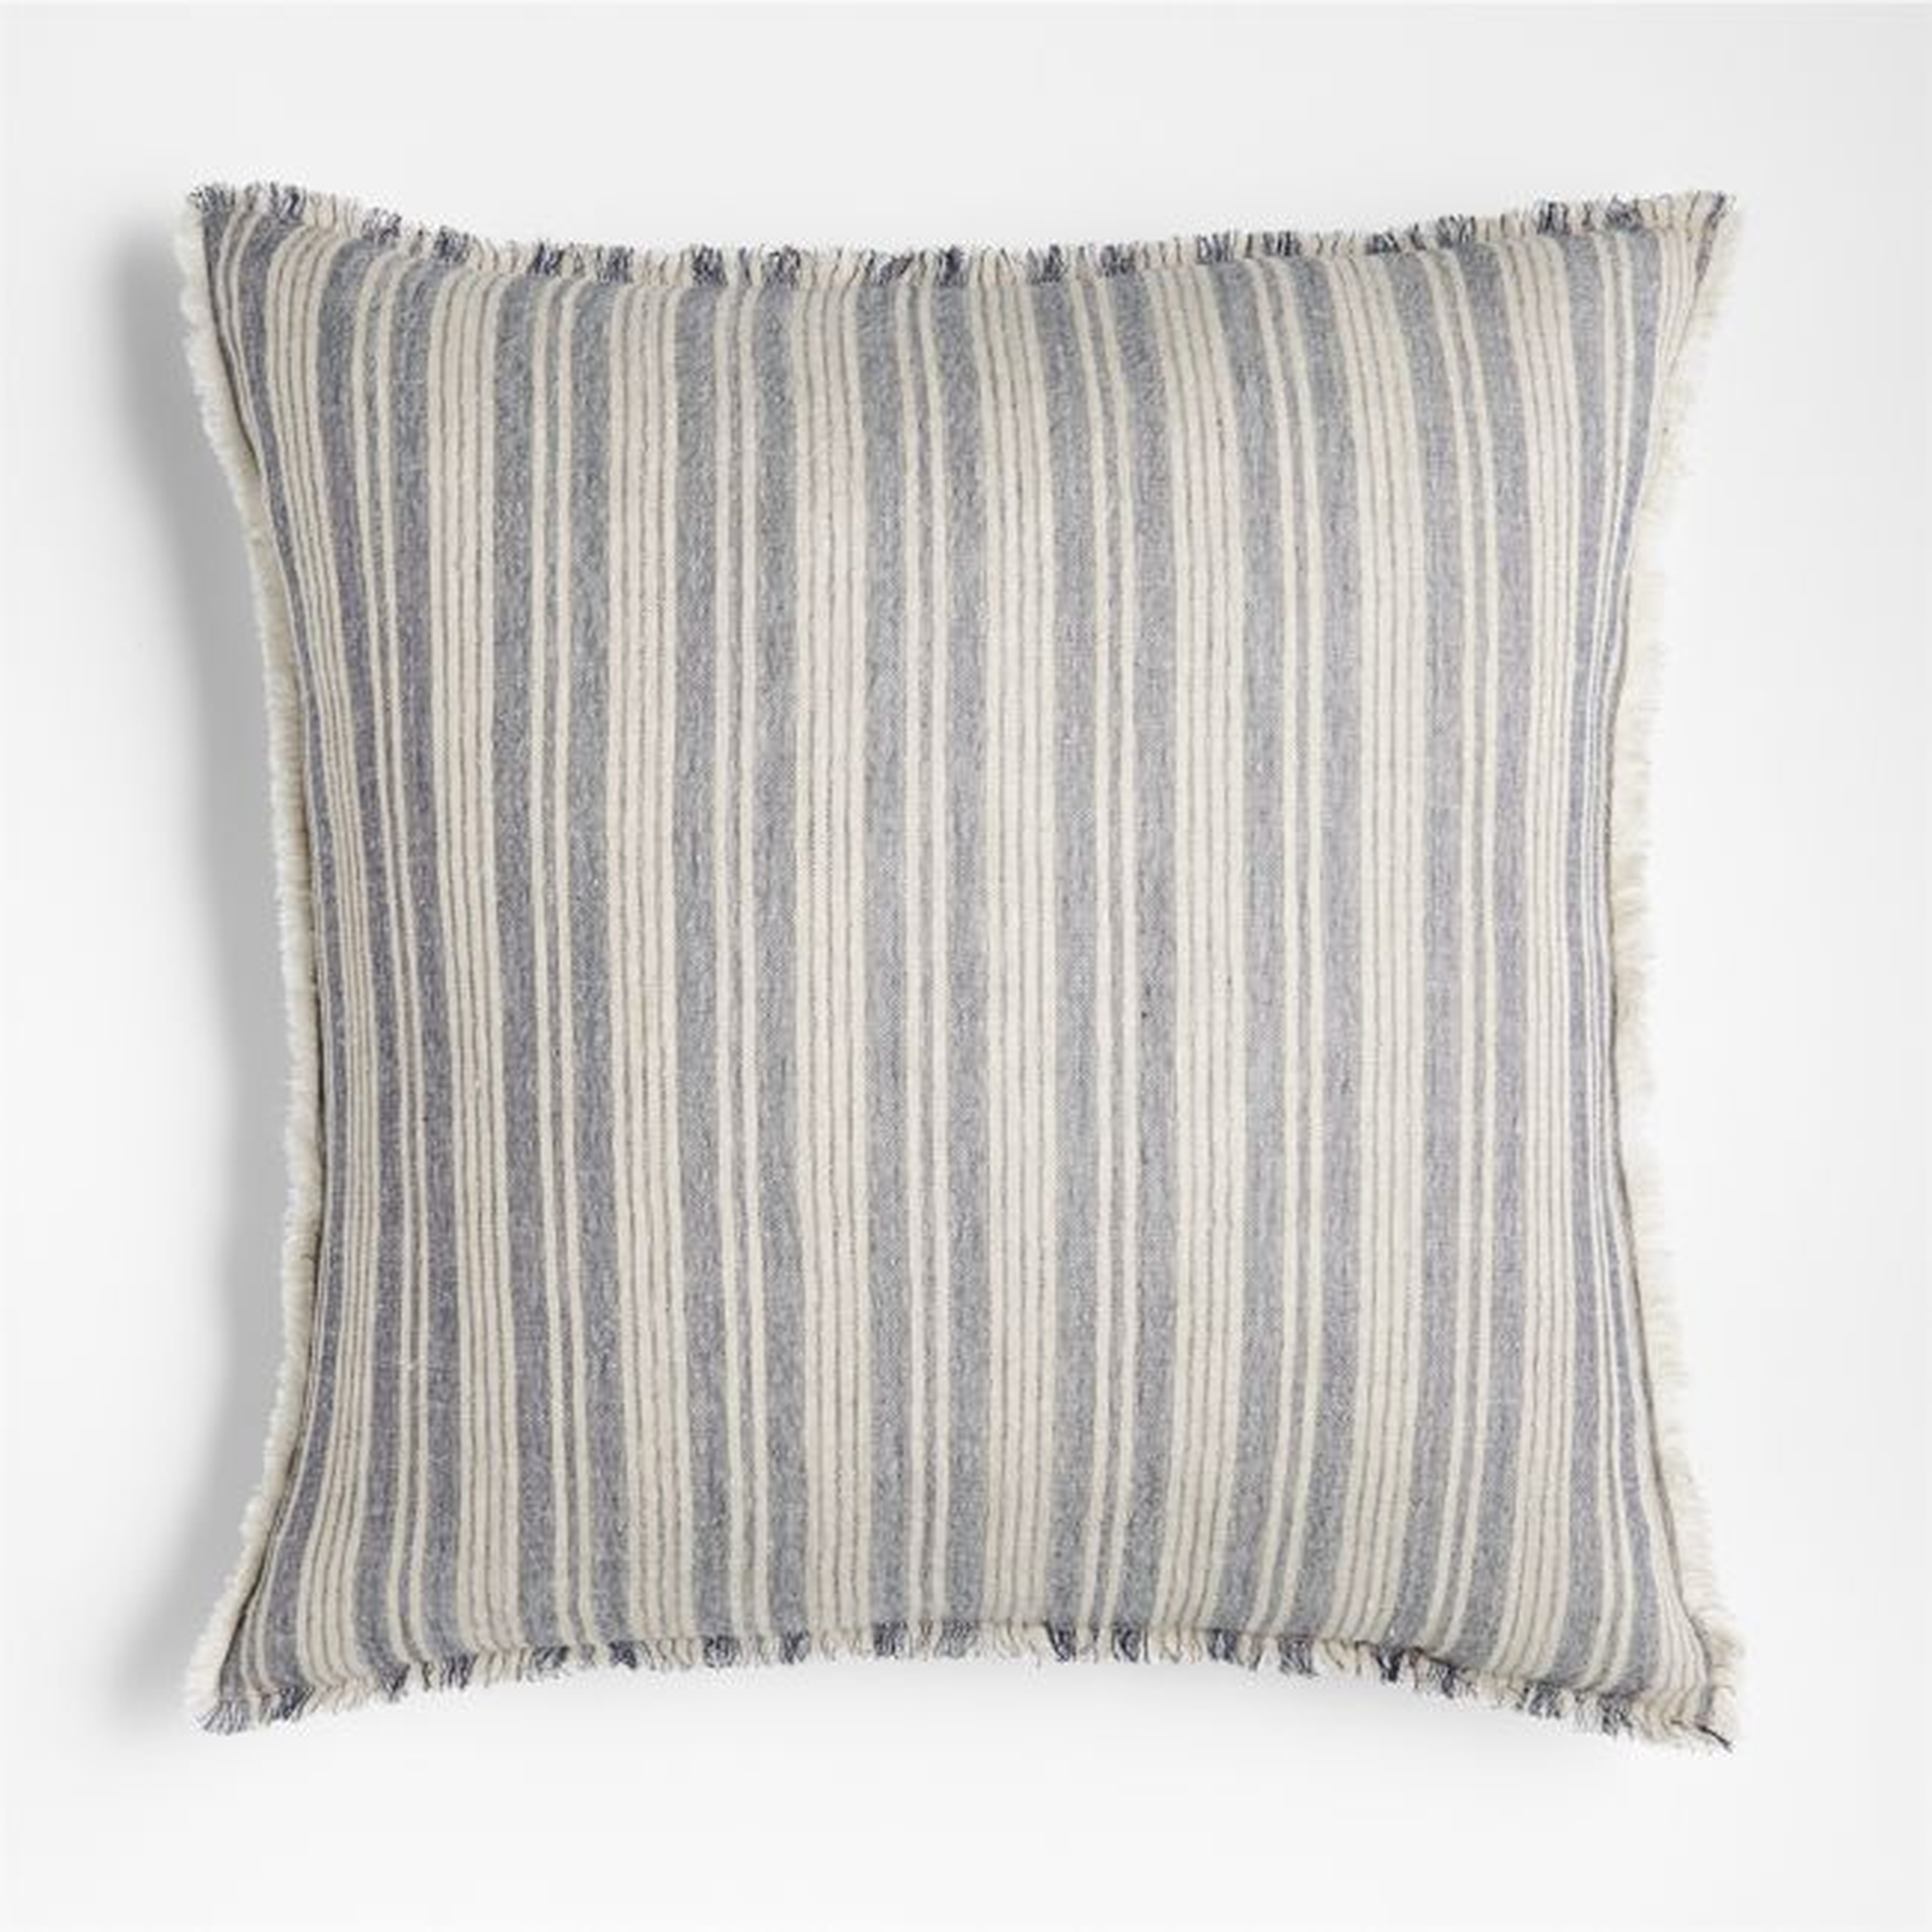 Arla 23"x23" Eyelash Striped Blue Throw Pillow Cover with Feather Insert - Crate and Barrel